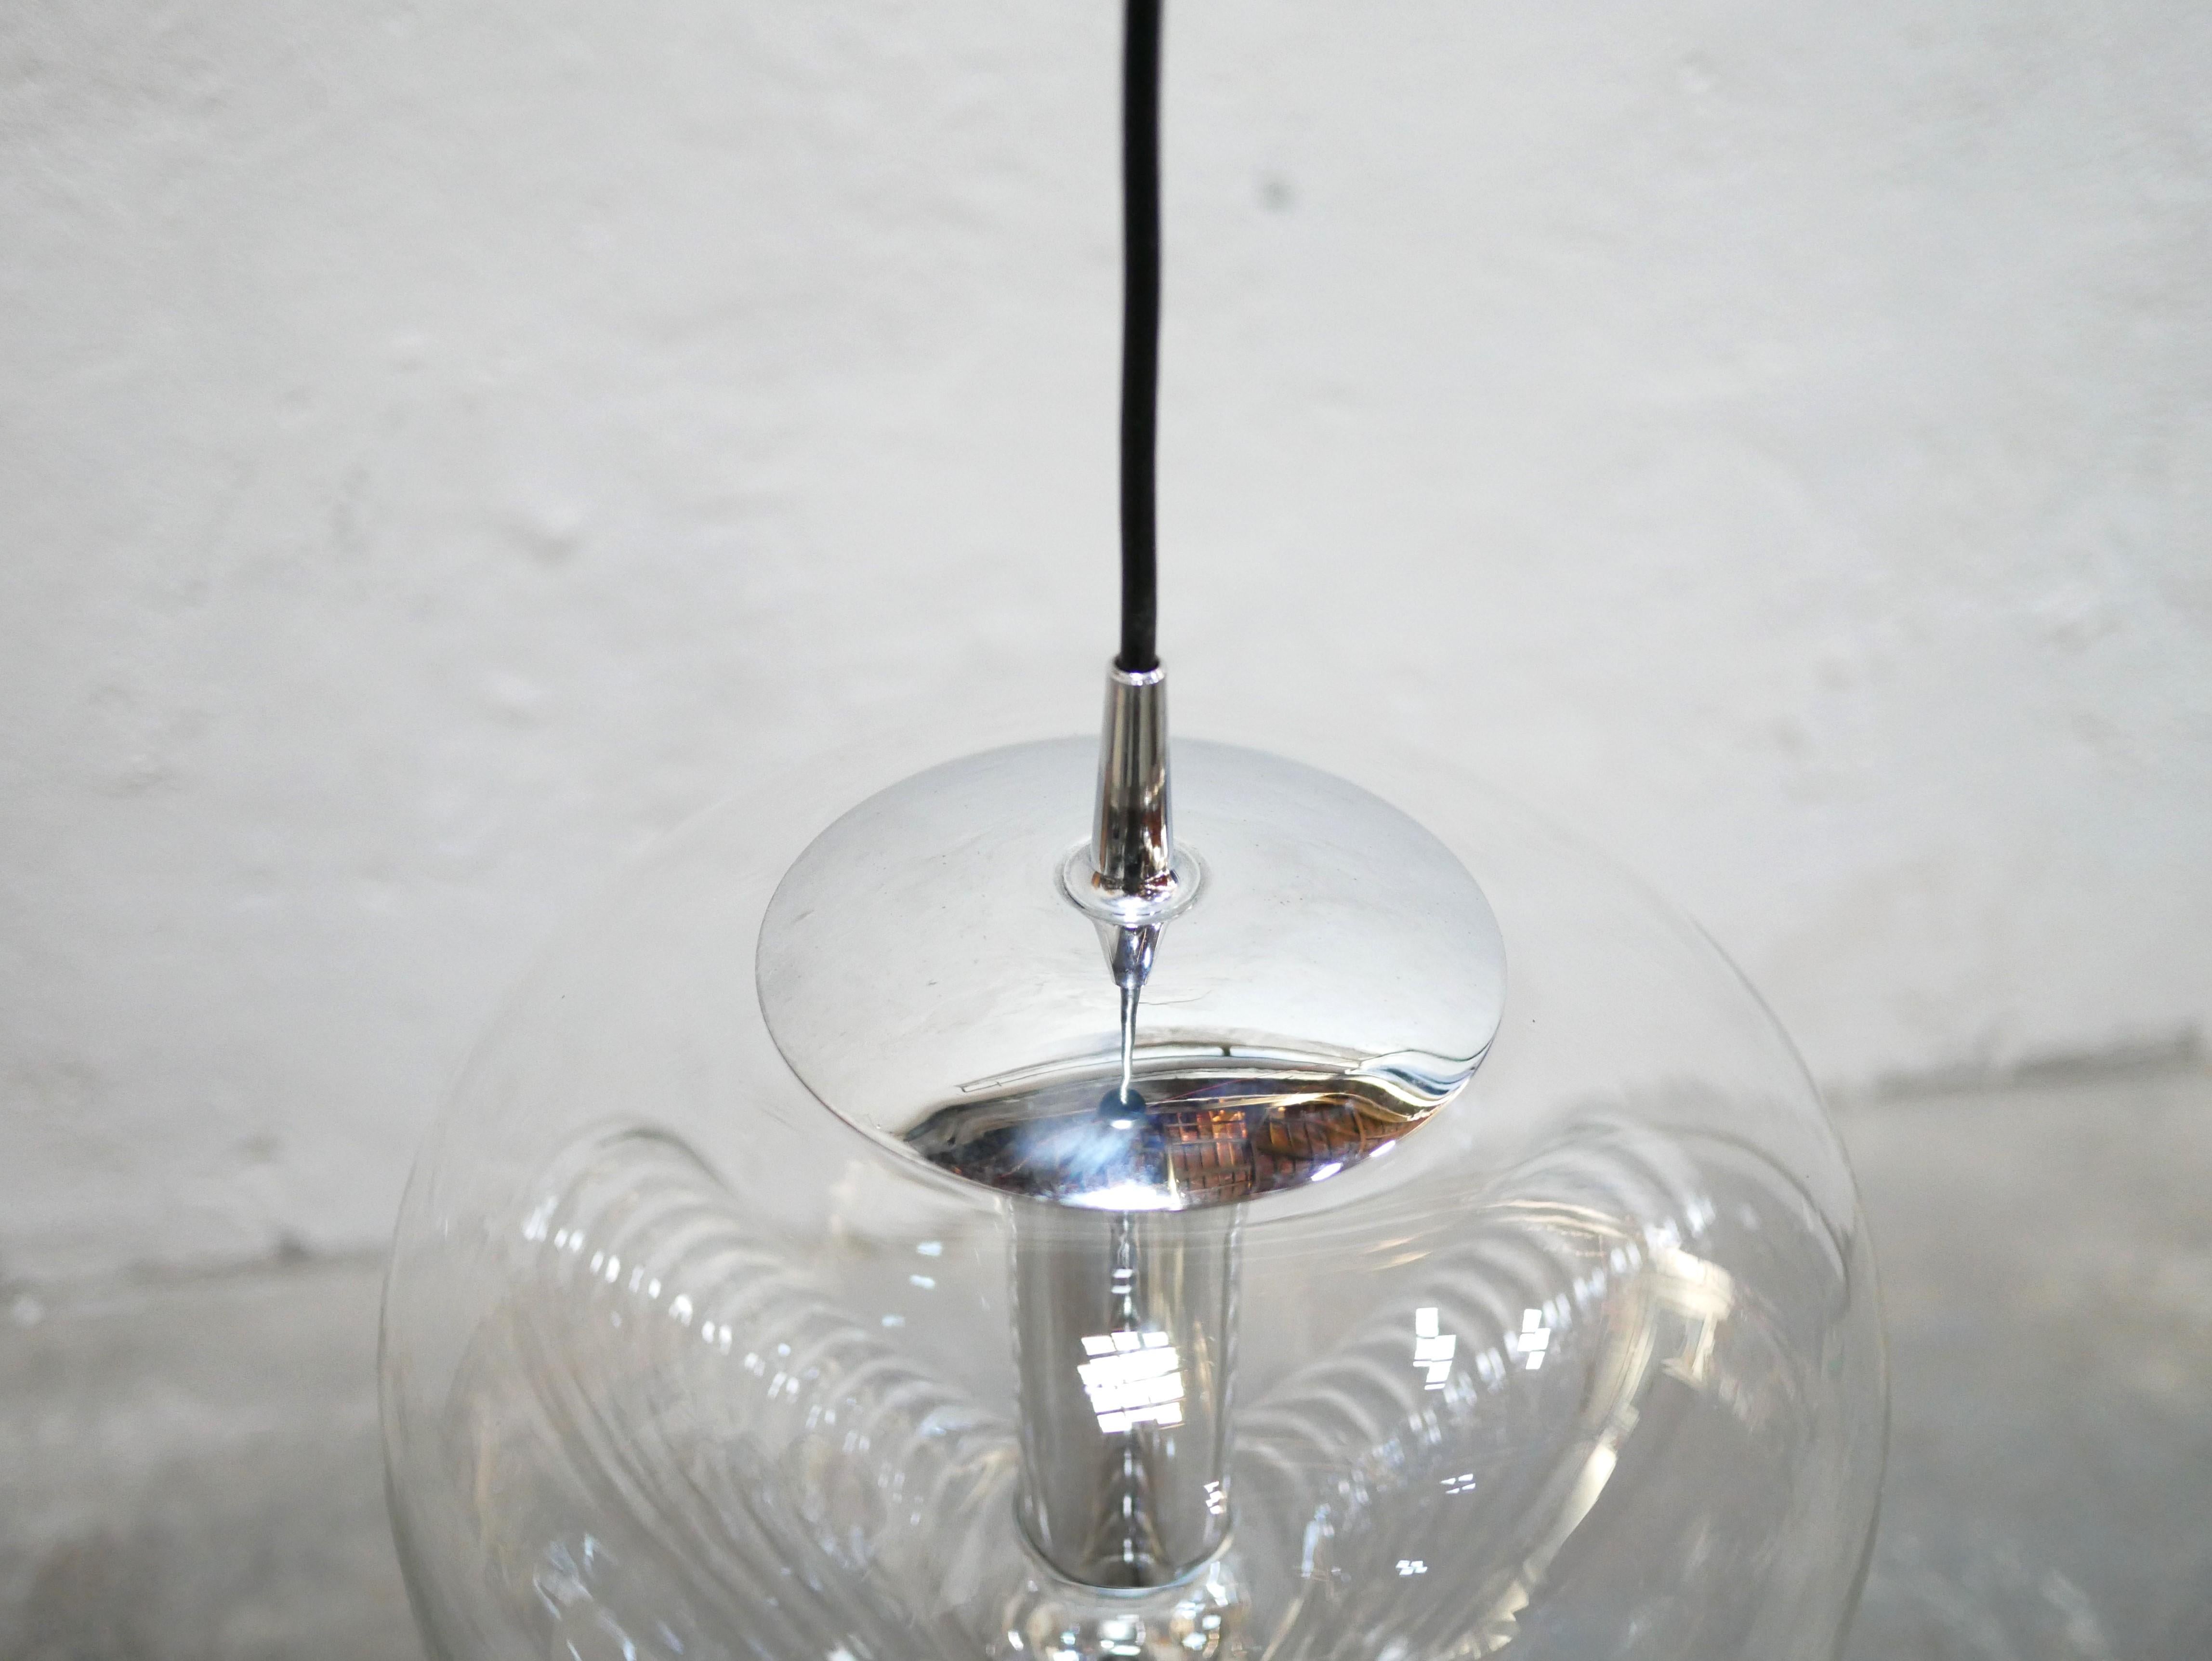 Transparent glass and chromed metal suspension, 